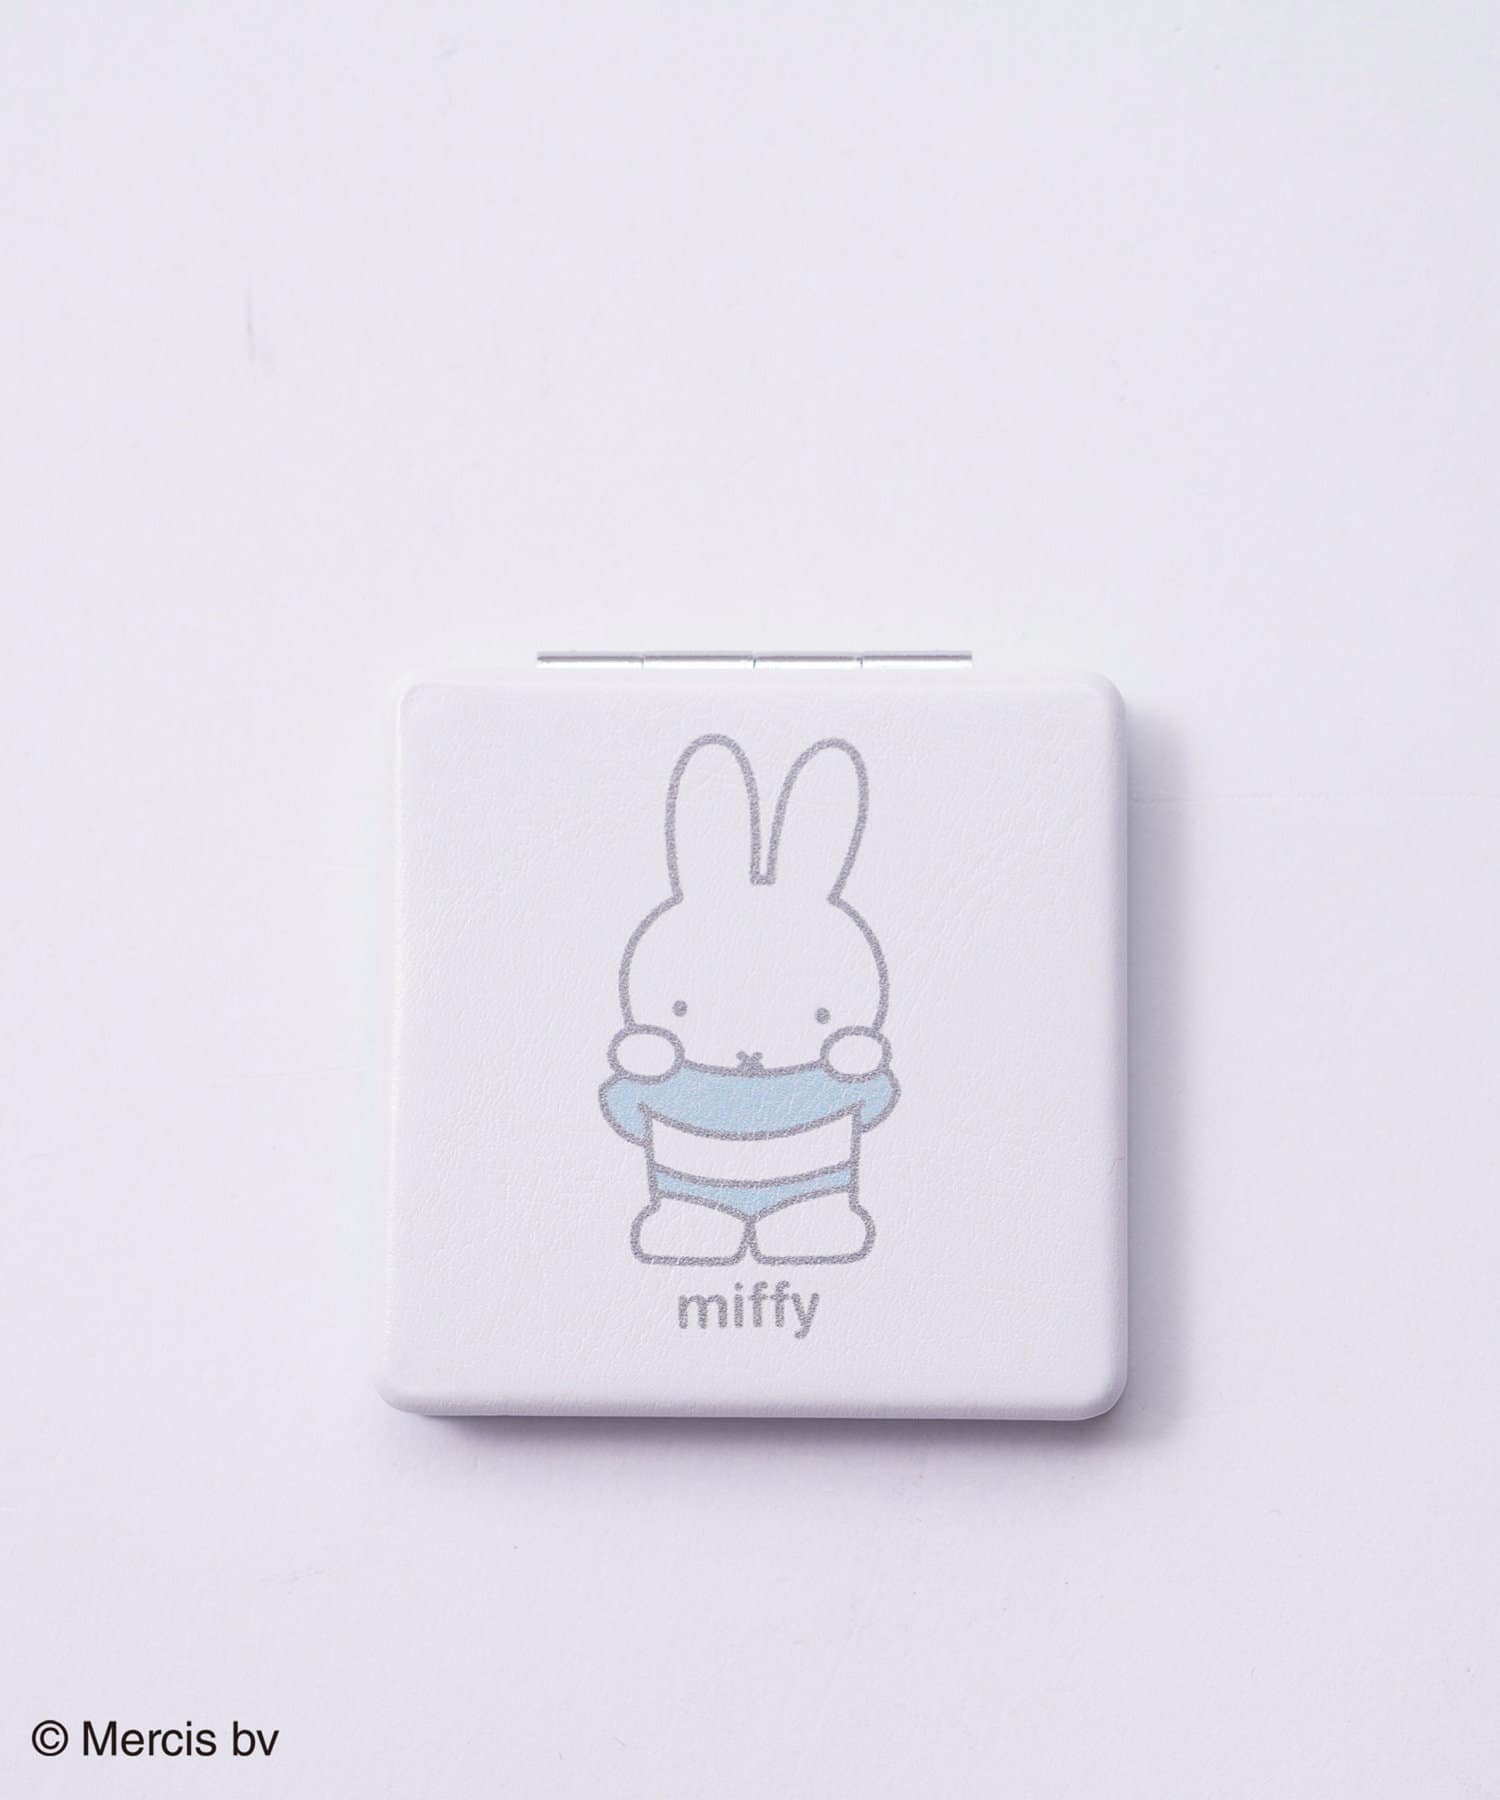 natural couture(ナチュラルクチュール) MIFFY FACE コンパクトミラー